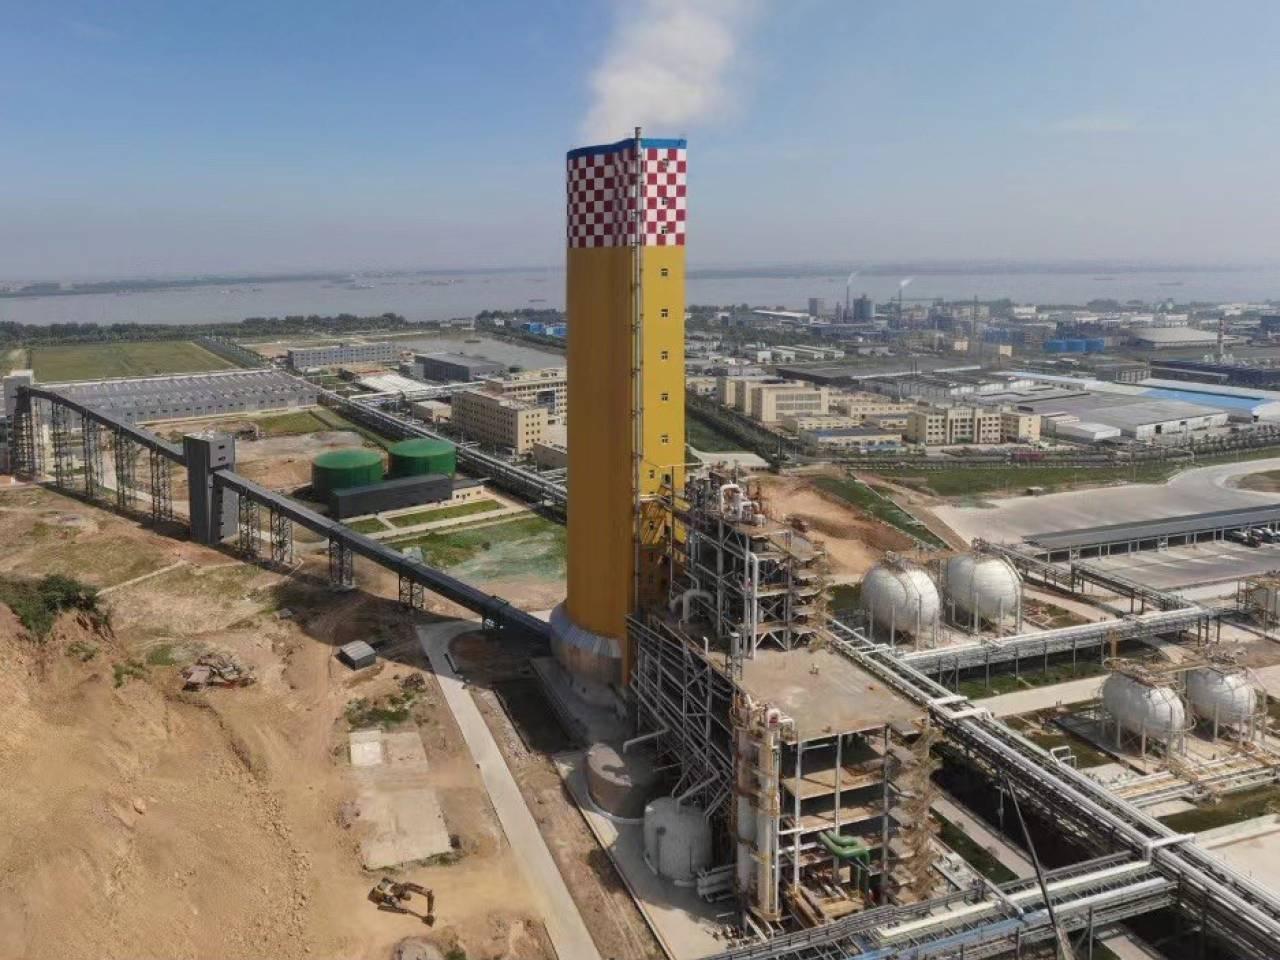 First ULE plant in operation in 2021 (XLX-I)